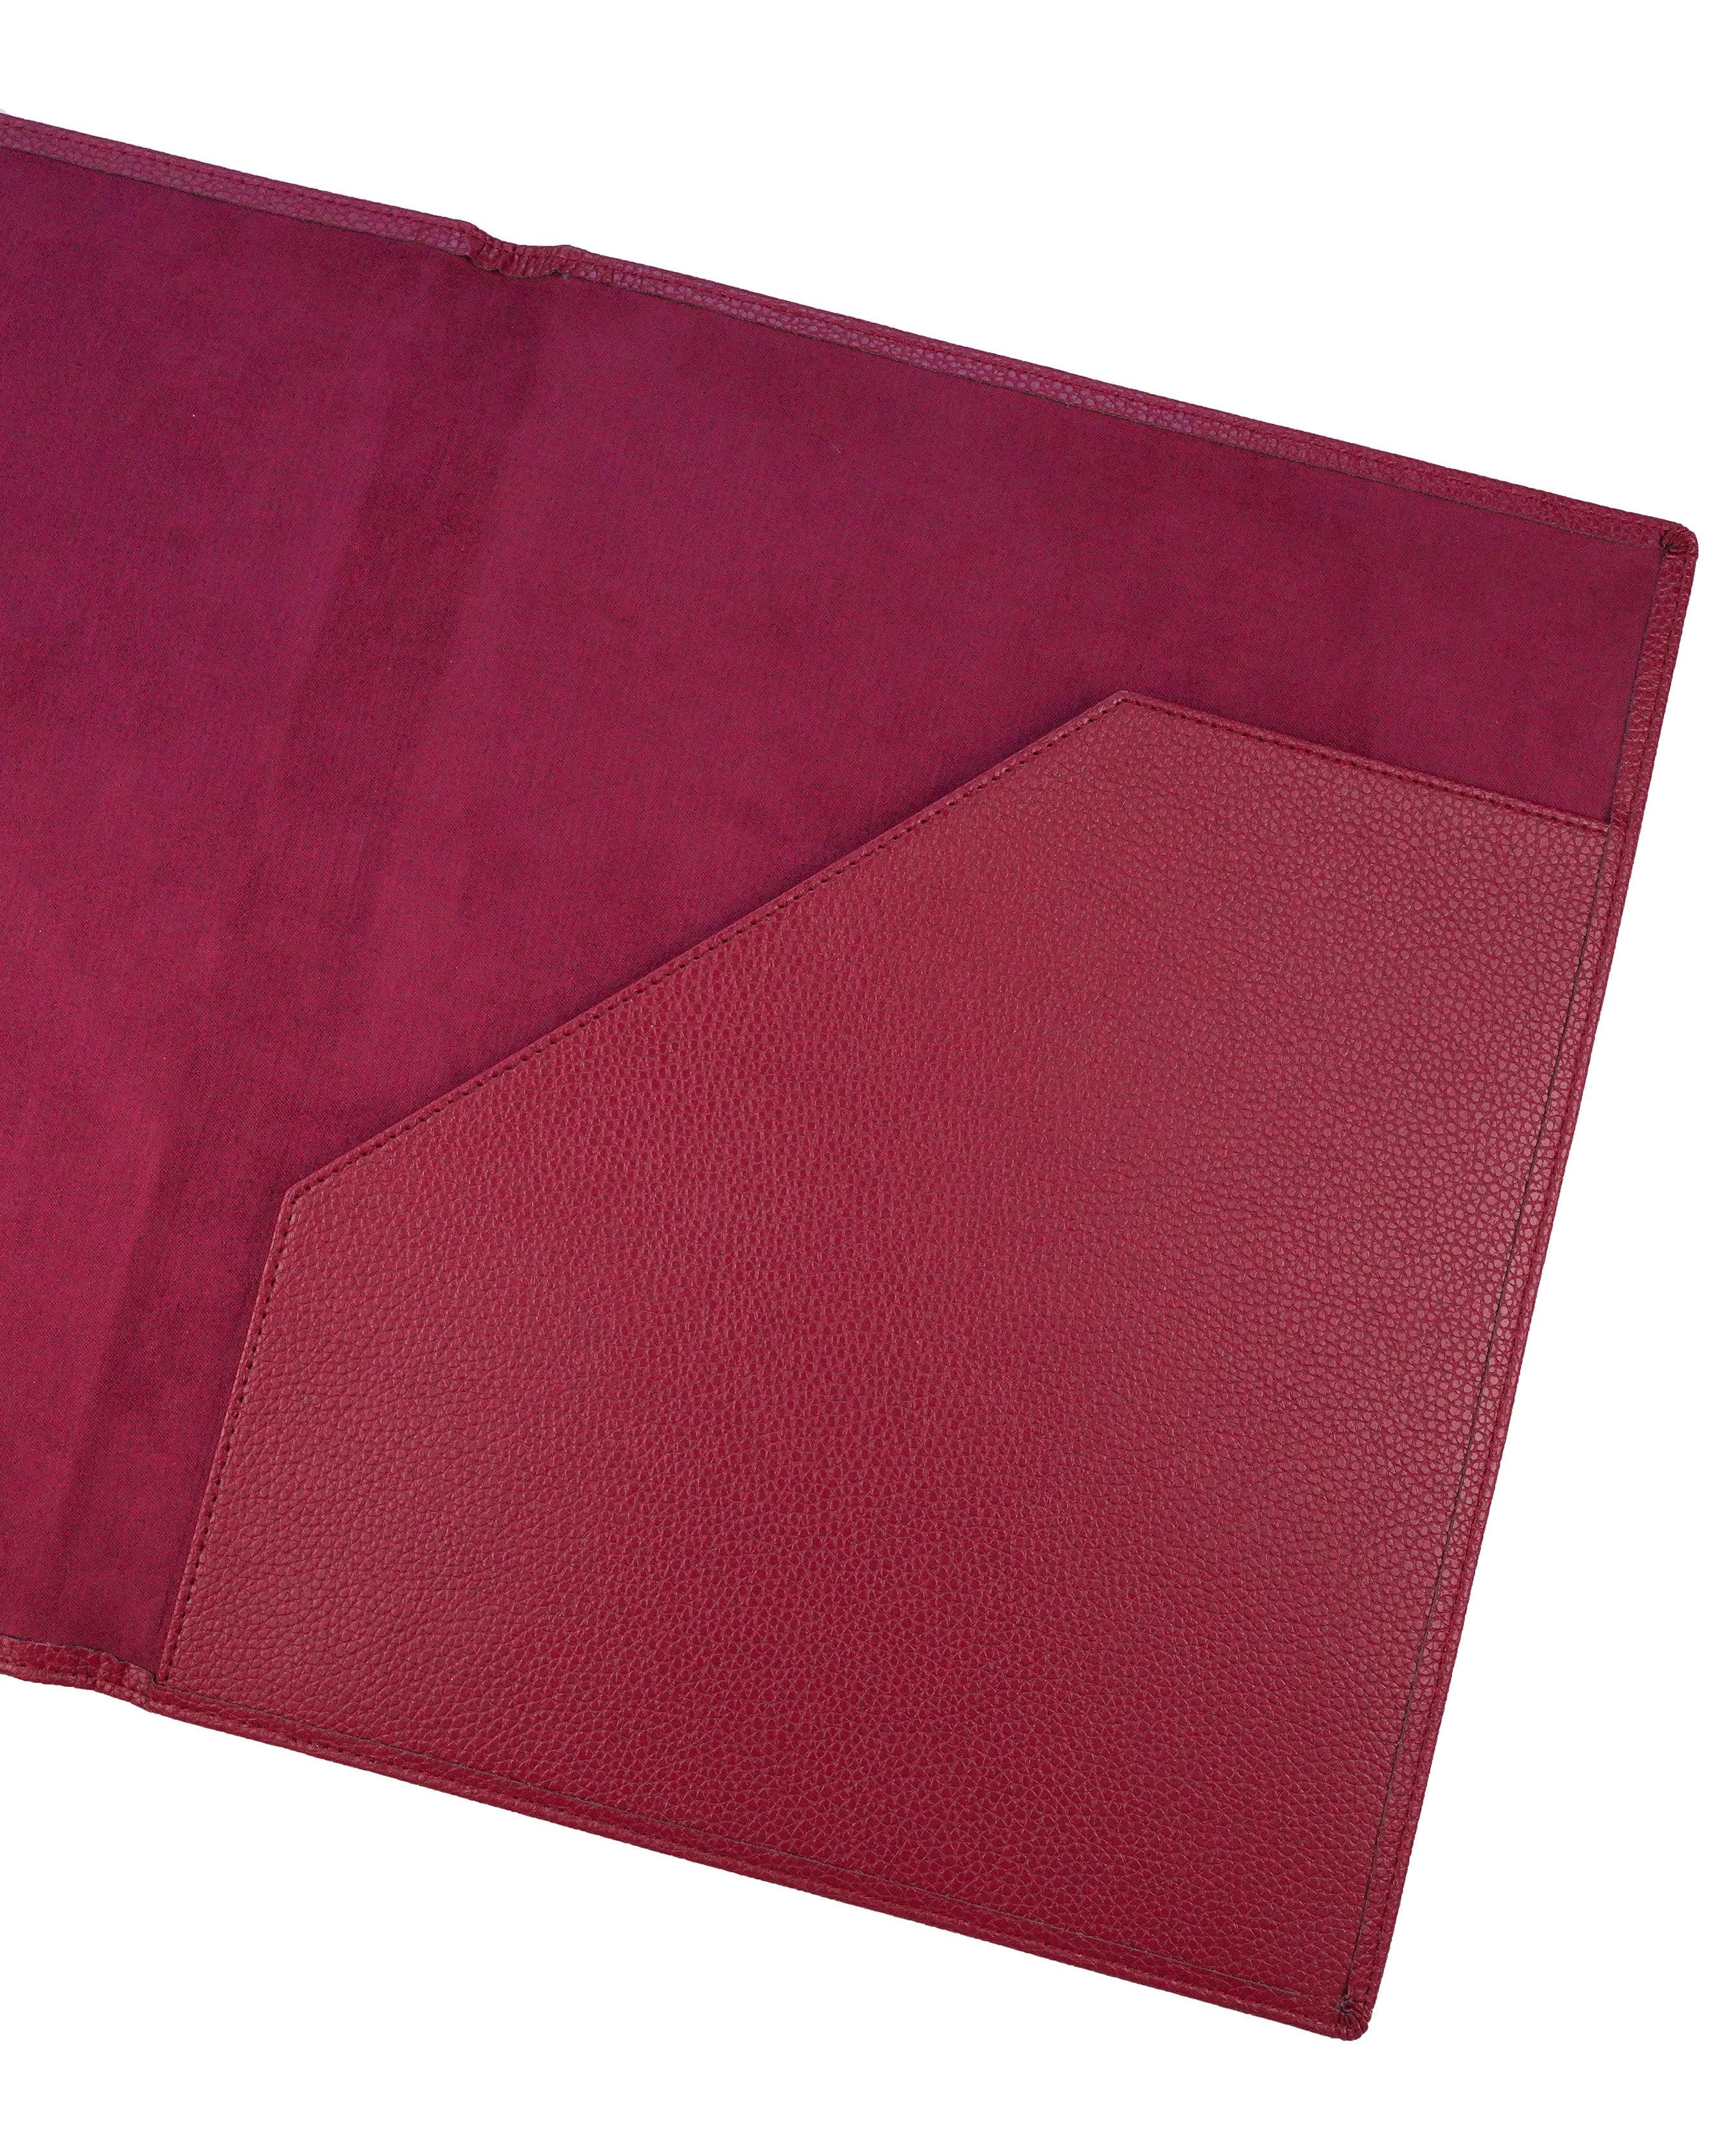 Wine leather vegan leather planner gift set by Jane's Agenda for discbound planners and disc notebook systems.